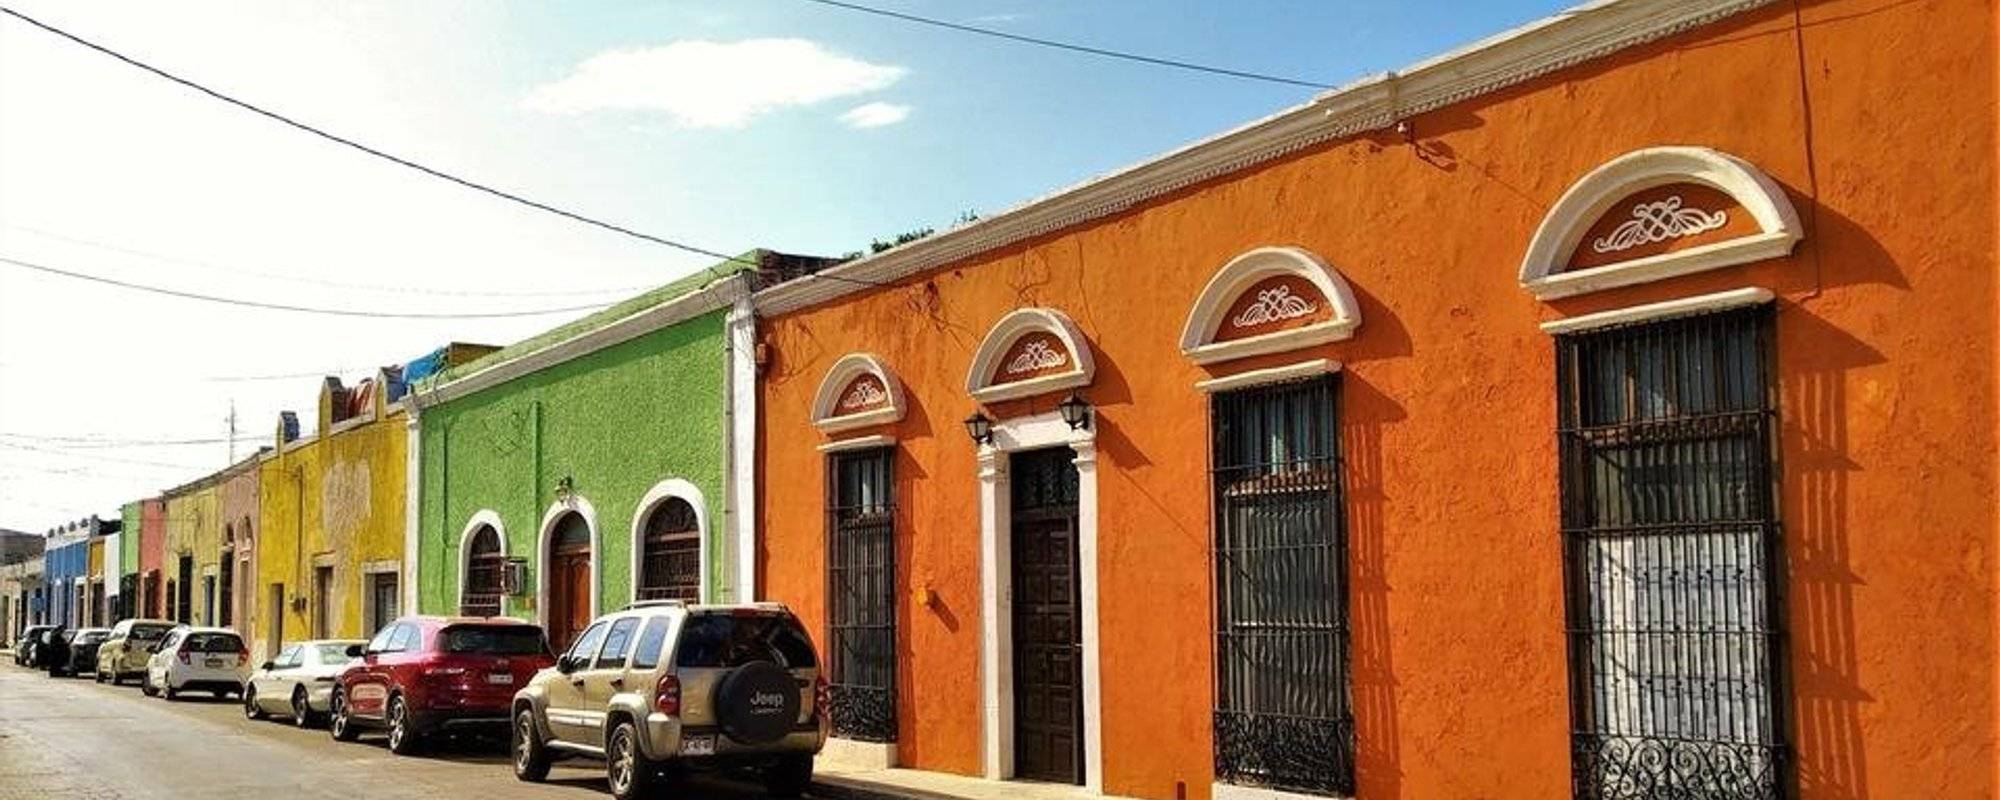 Beauties of Yucatan: picturesque colorful houses of Campeche - part 2